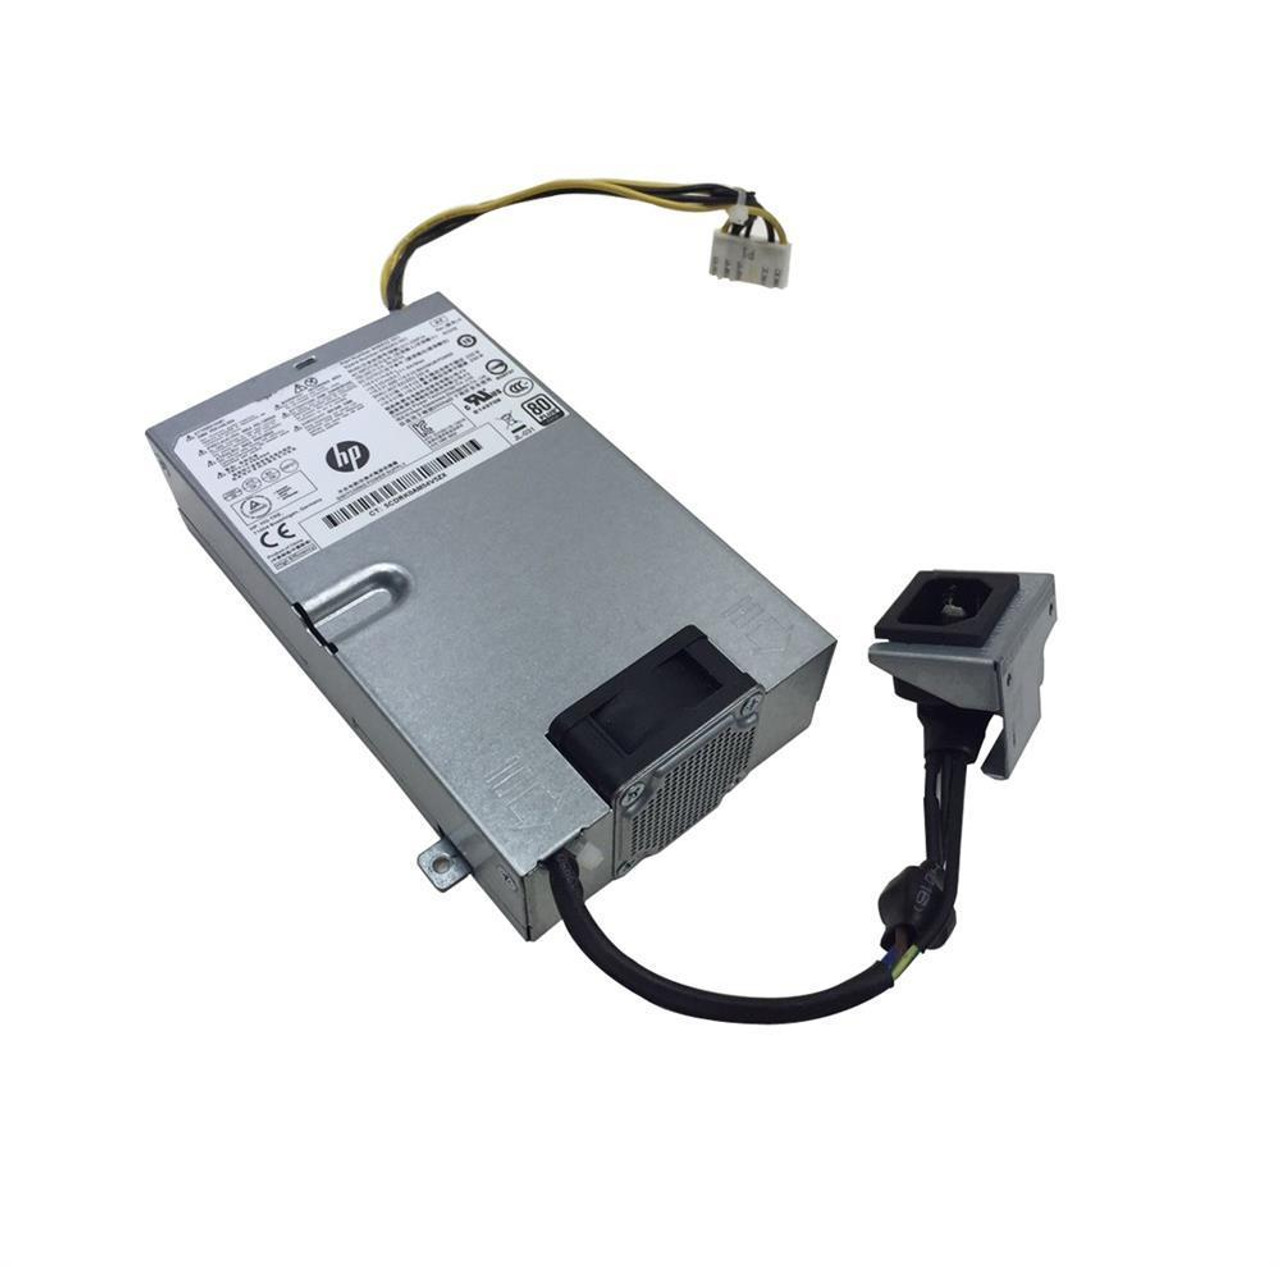 696643-001 HP 230-Watts ATX 19V Power Supply with Bracket for 8300 All-in-One Desktop System